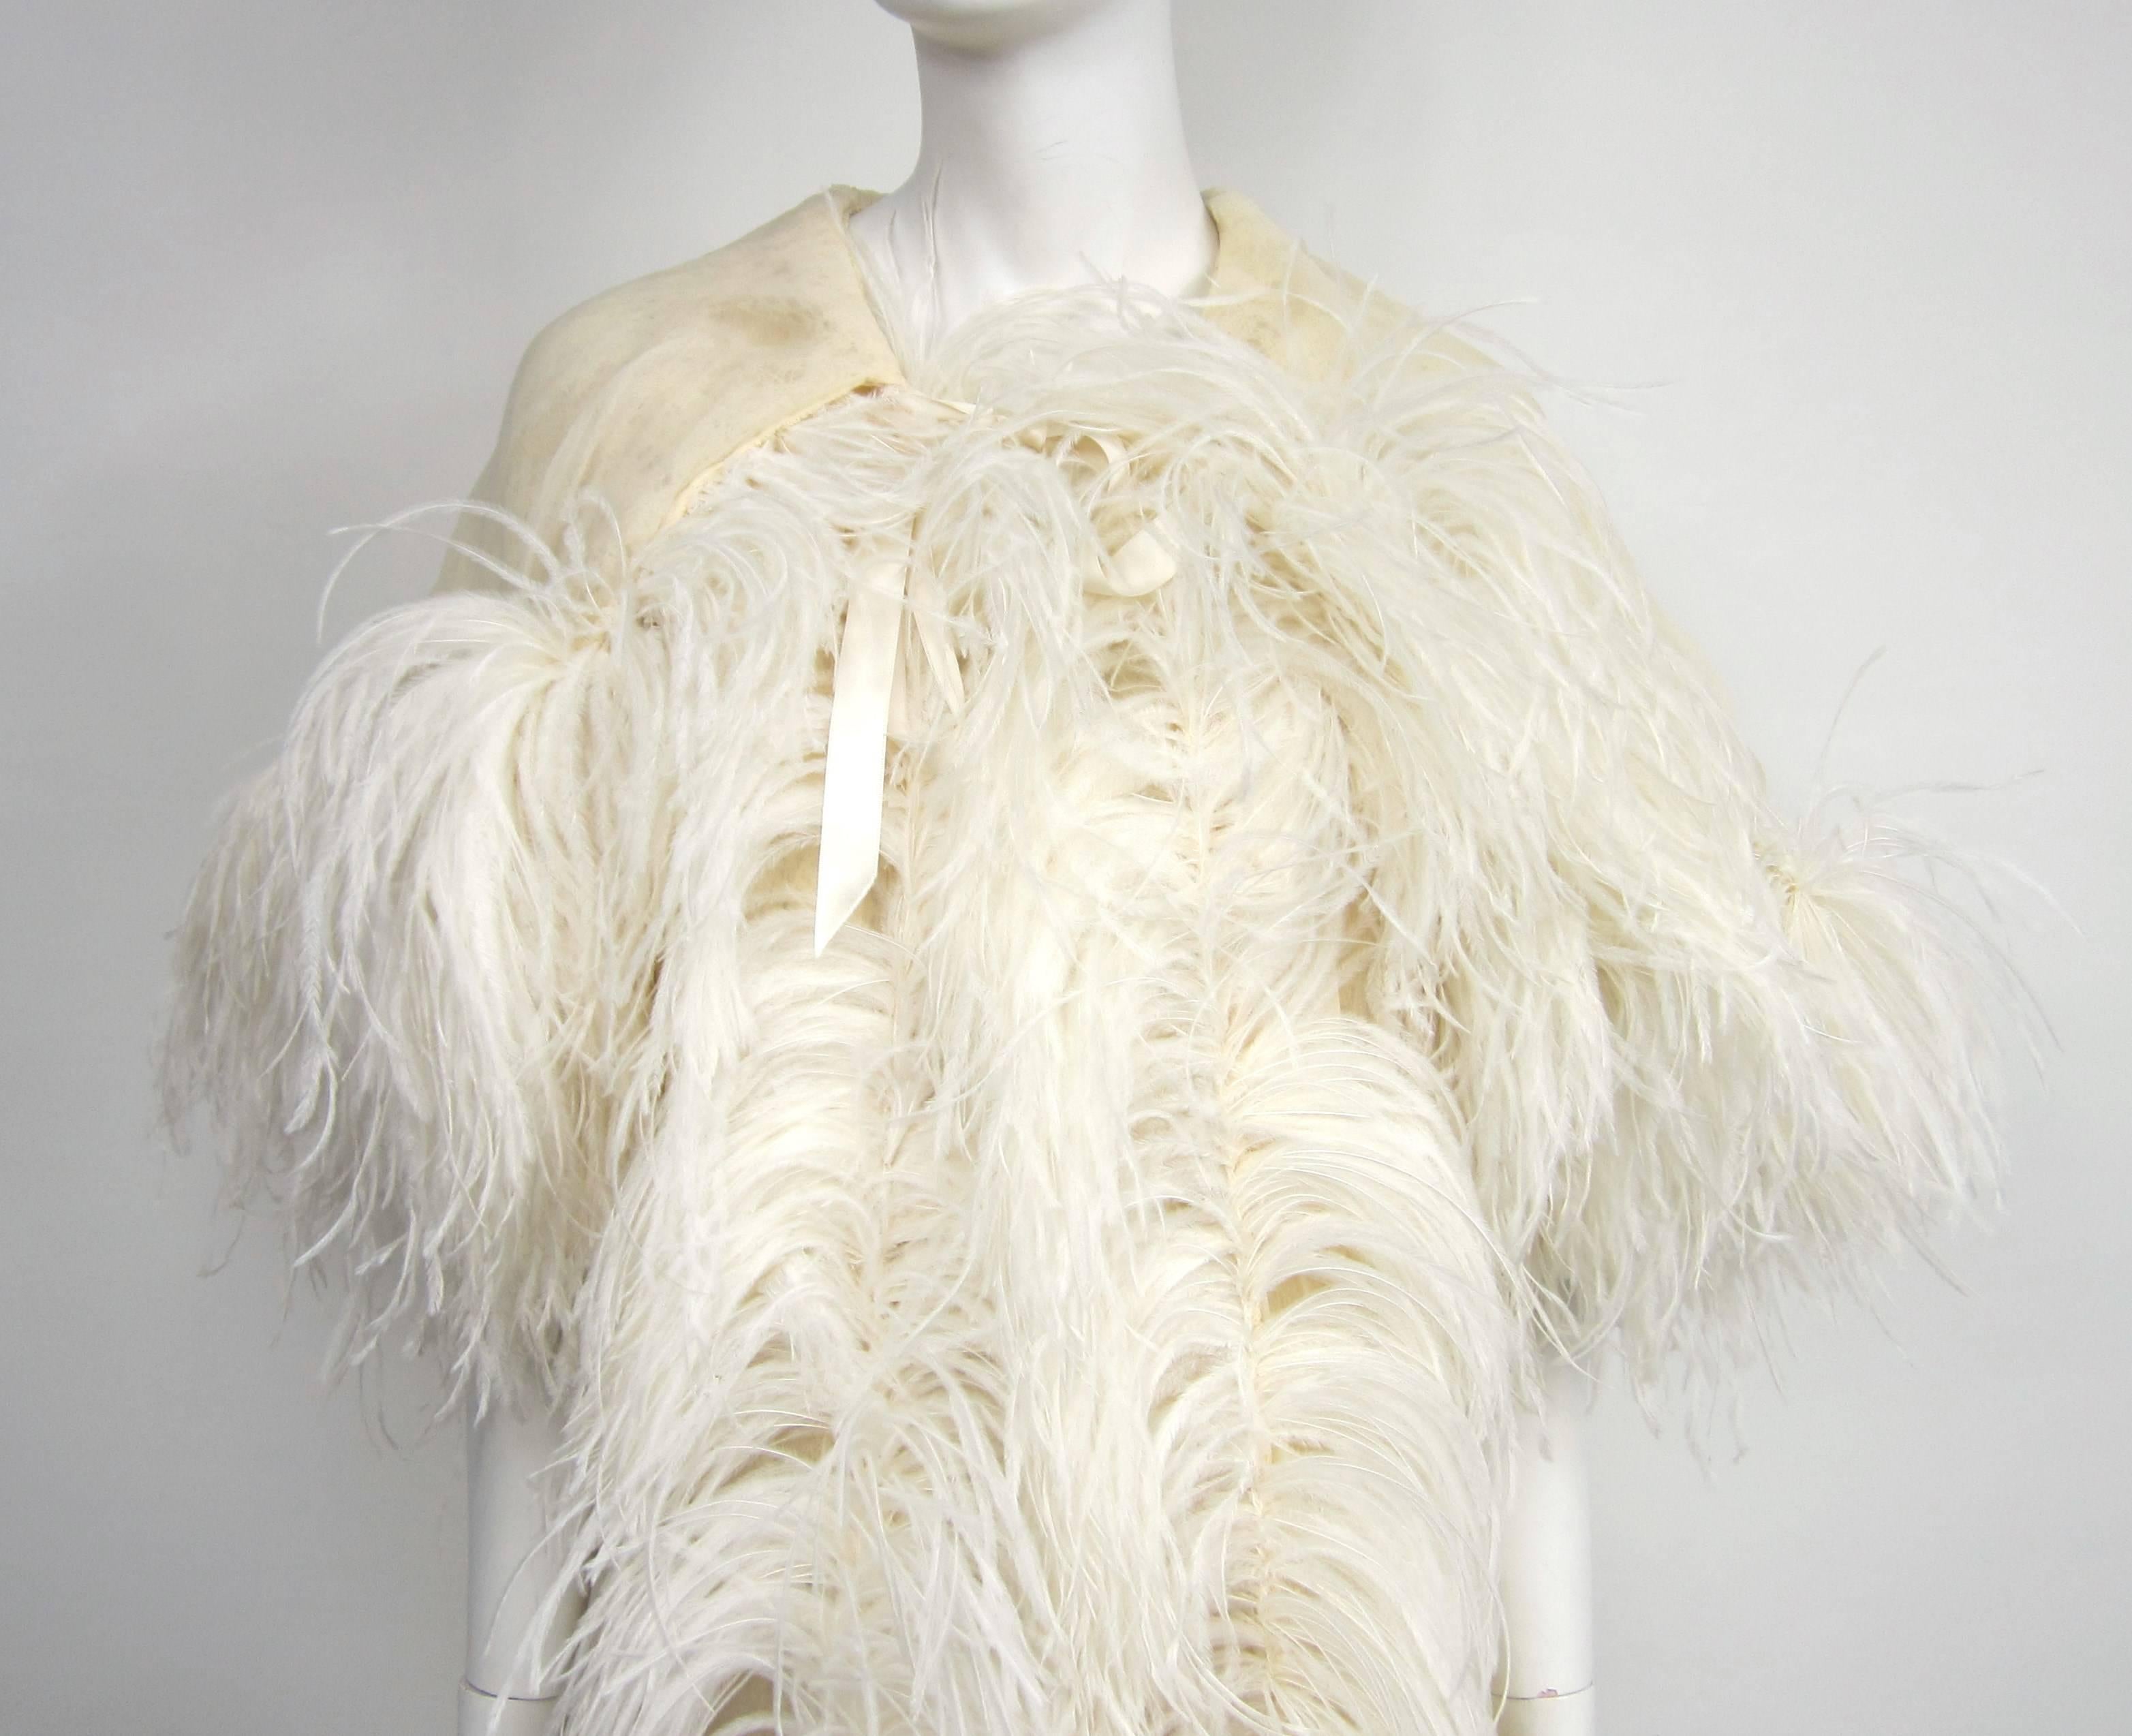 This is stunning in person
Feathered all down the front and around the hood
Ribbon tie at the neckline
Lined with cream colored netted fabric 
Will fit a Small- Med
Comes with a night gown which is more a small
Beaded bodice 
Any questions